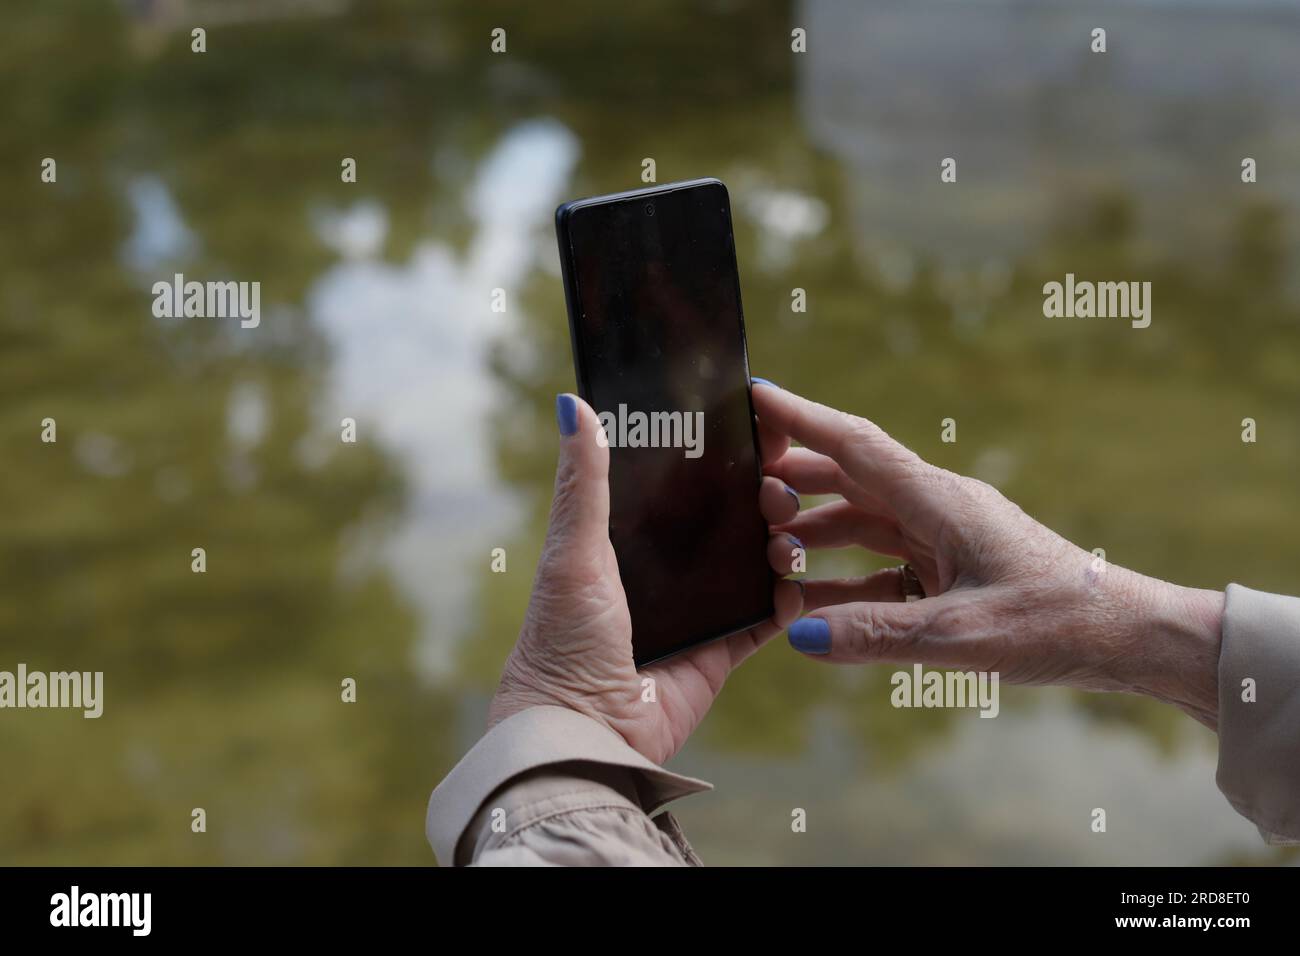 elderly woman's hands holding cell phone in a lake Stock Photo